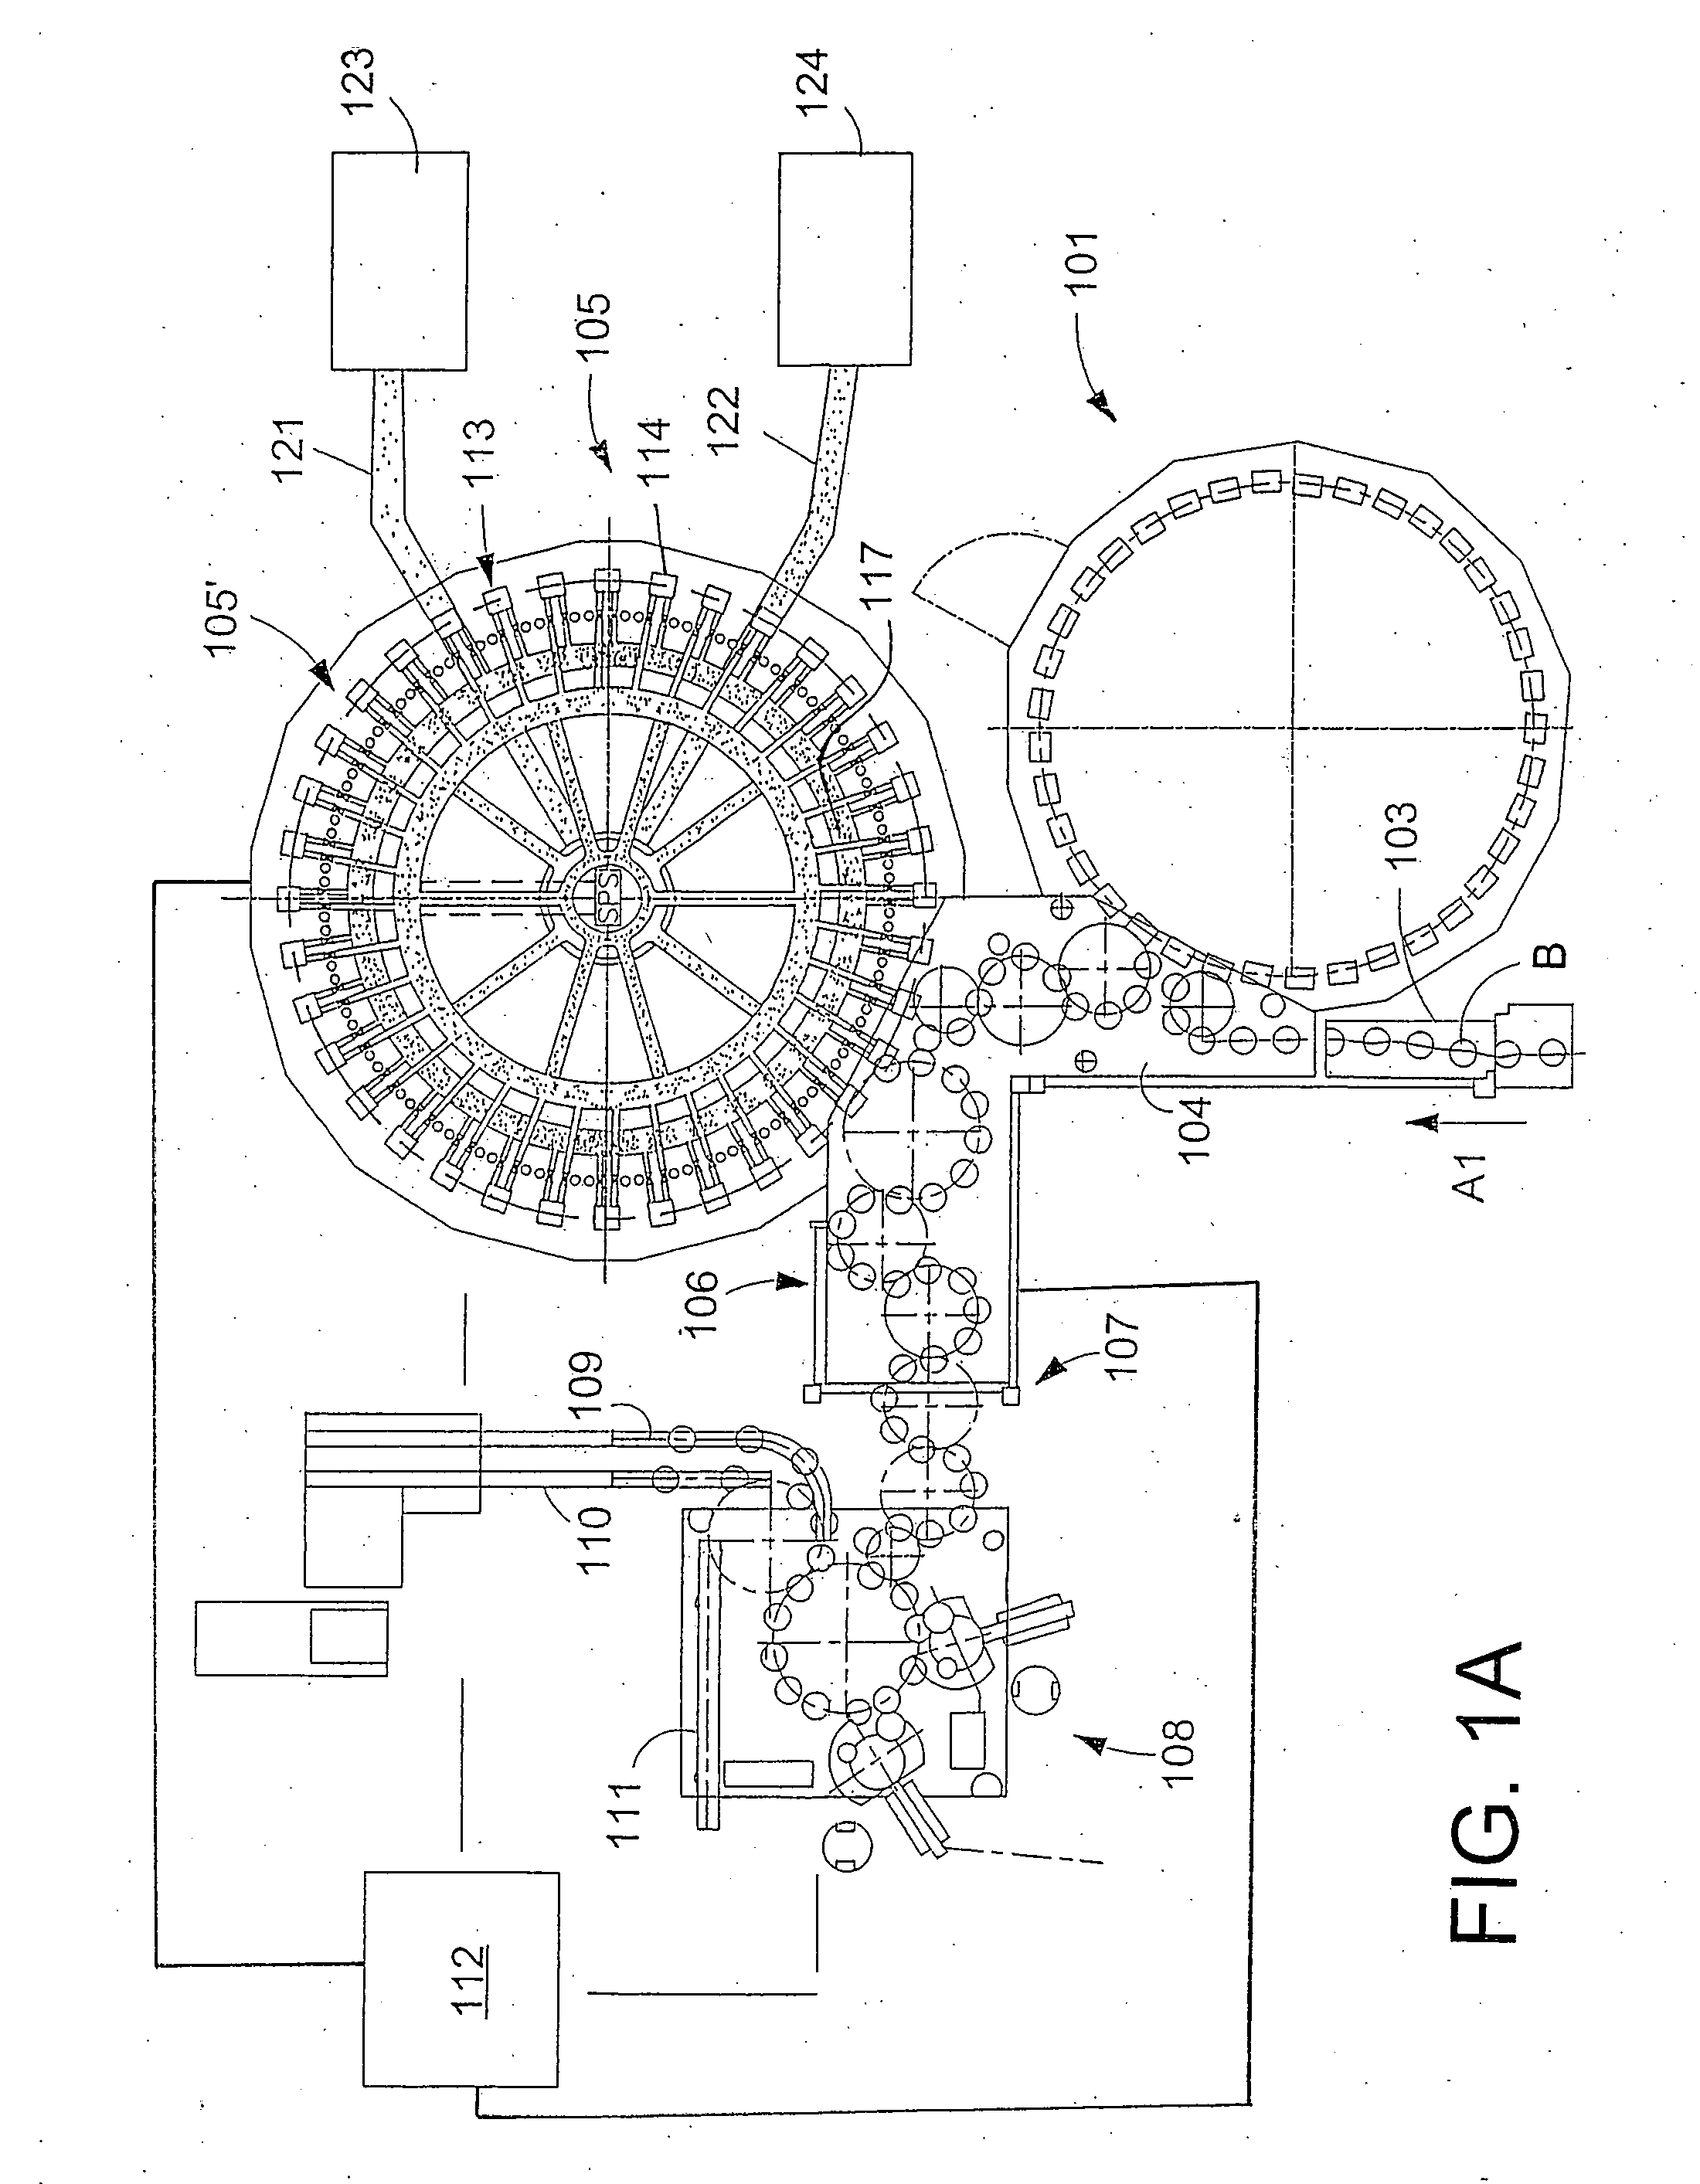 Beverage bottling plant for filling bottles with a liquid beverage filling material having a closing machine for closing containers